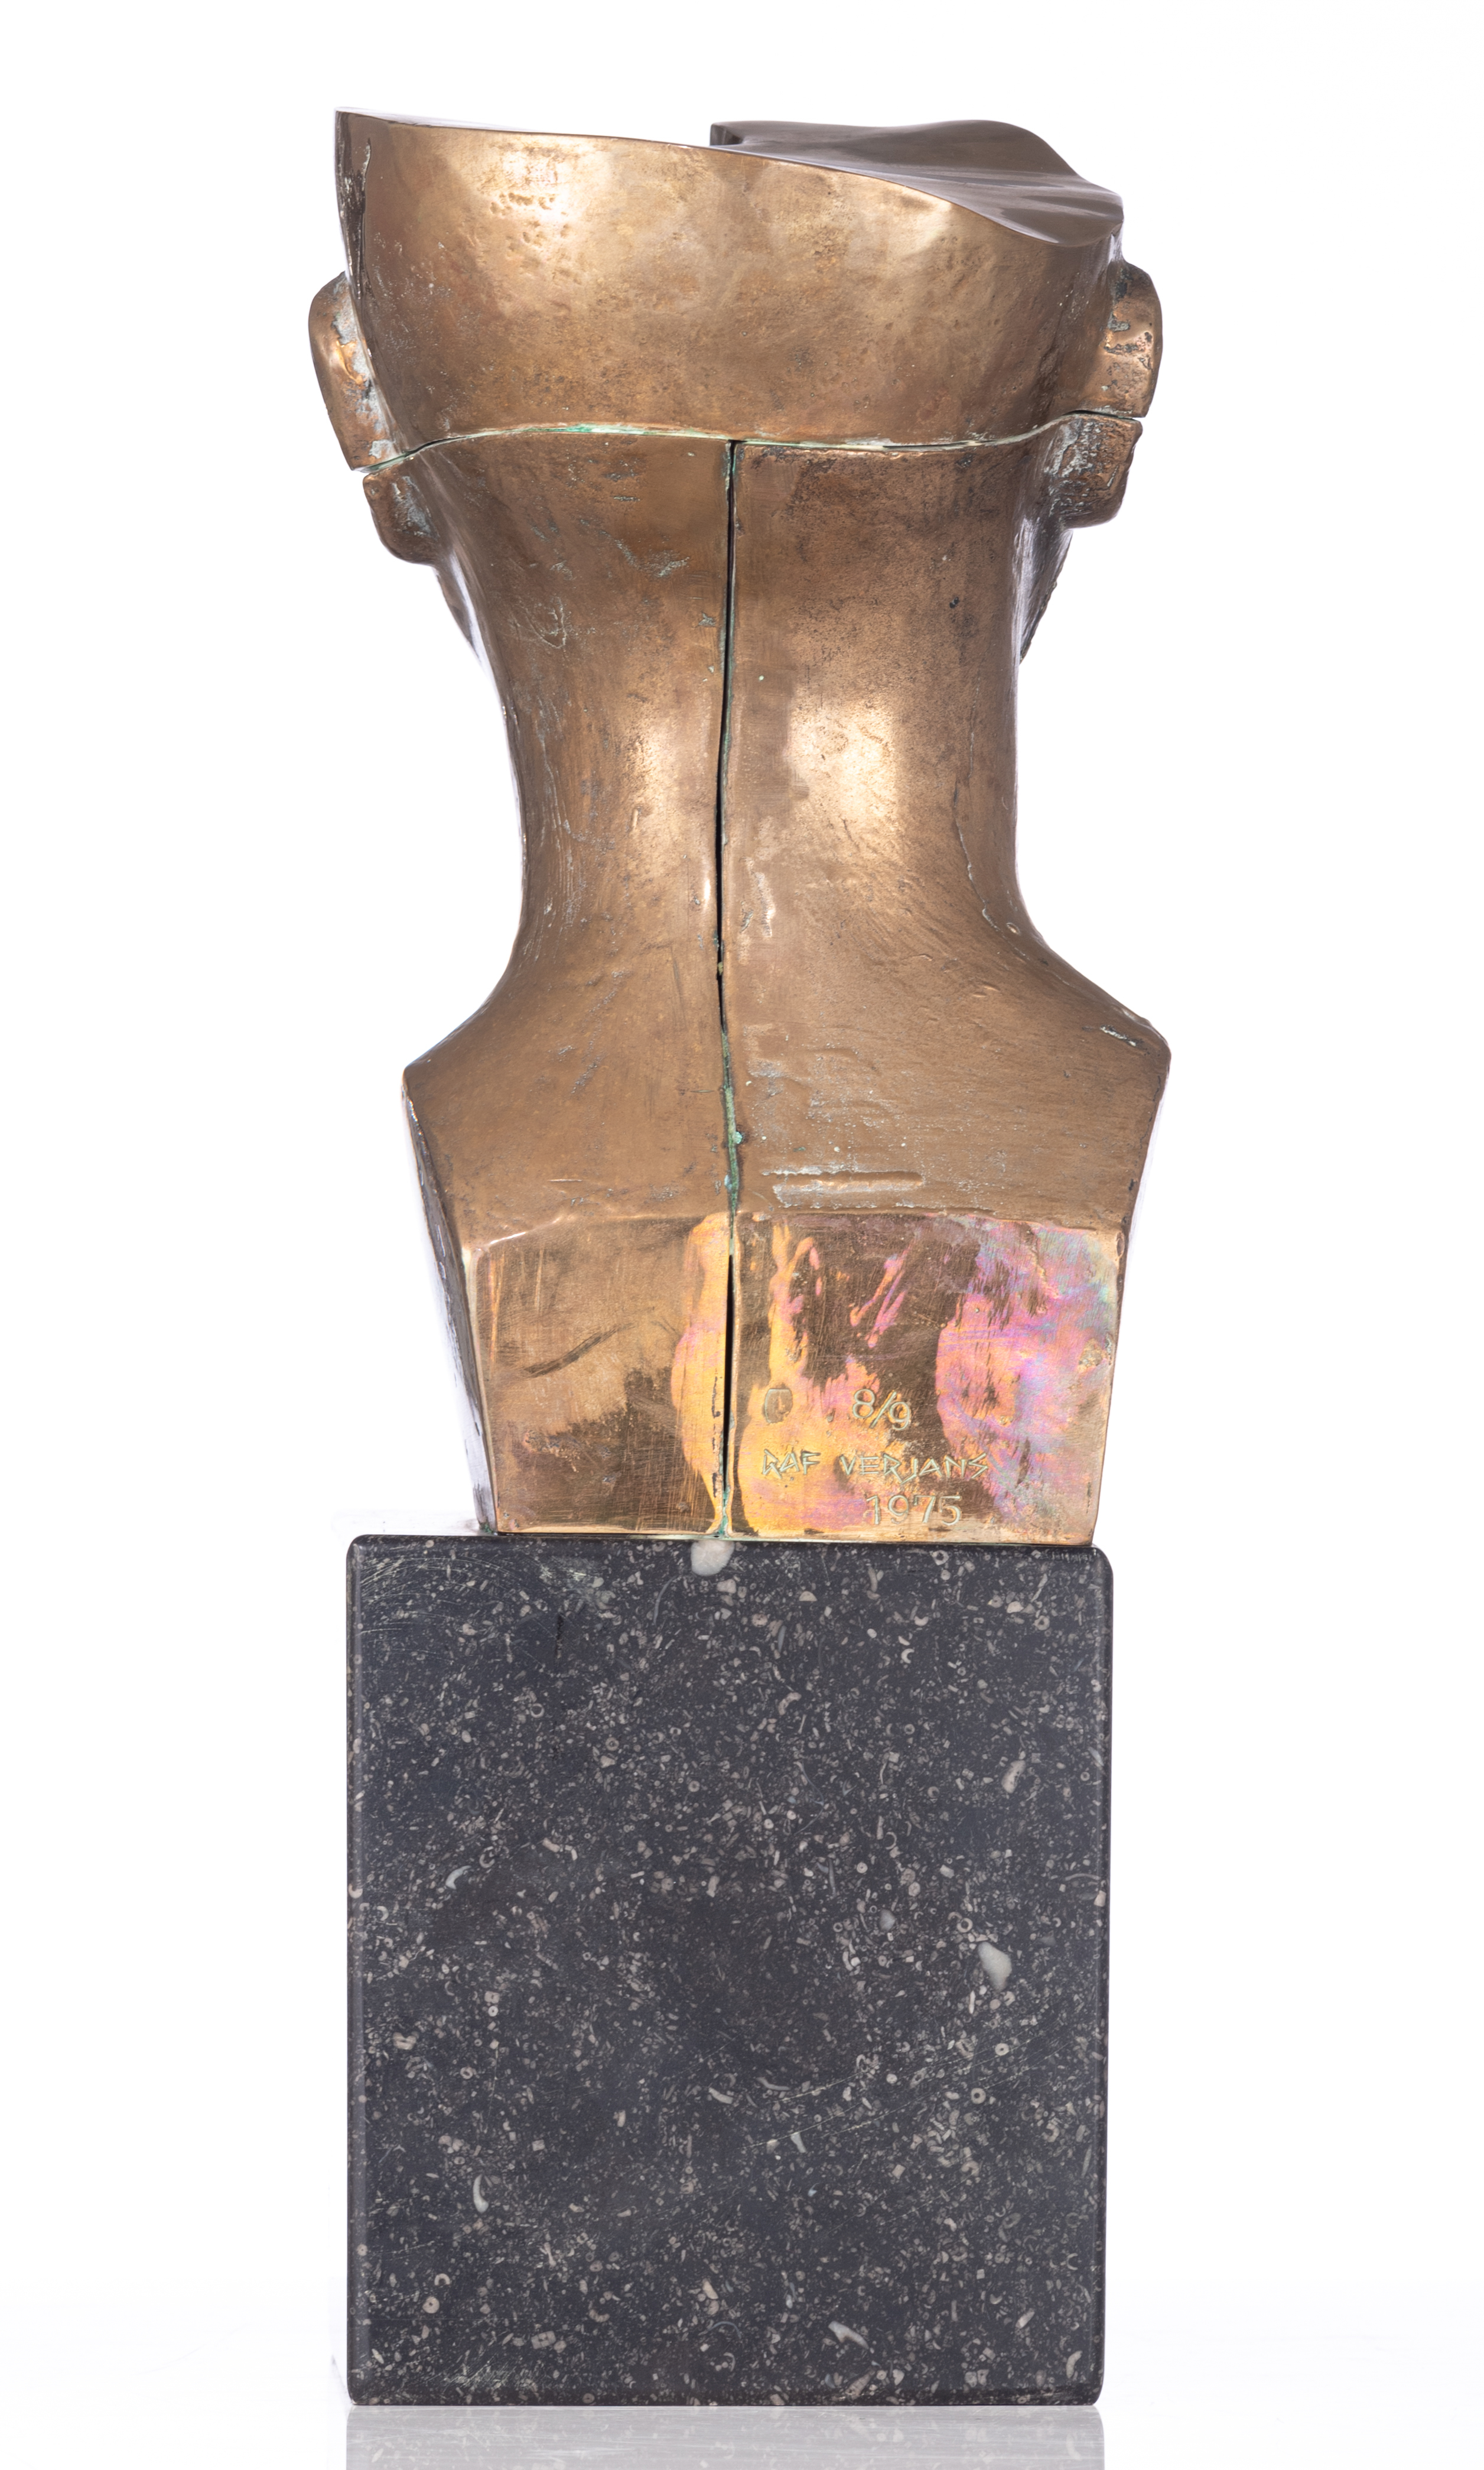 Claerhout J., untitled, patinated bronze, H 42 - W 46 cm. Added: Verjans R., untitled, dated 1975, N - Image 4 of 12